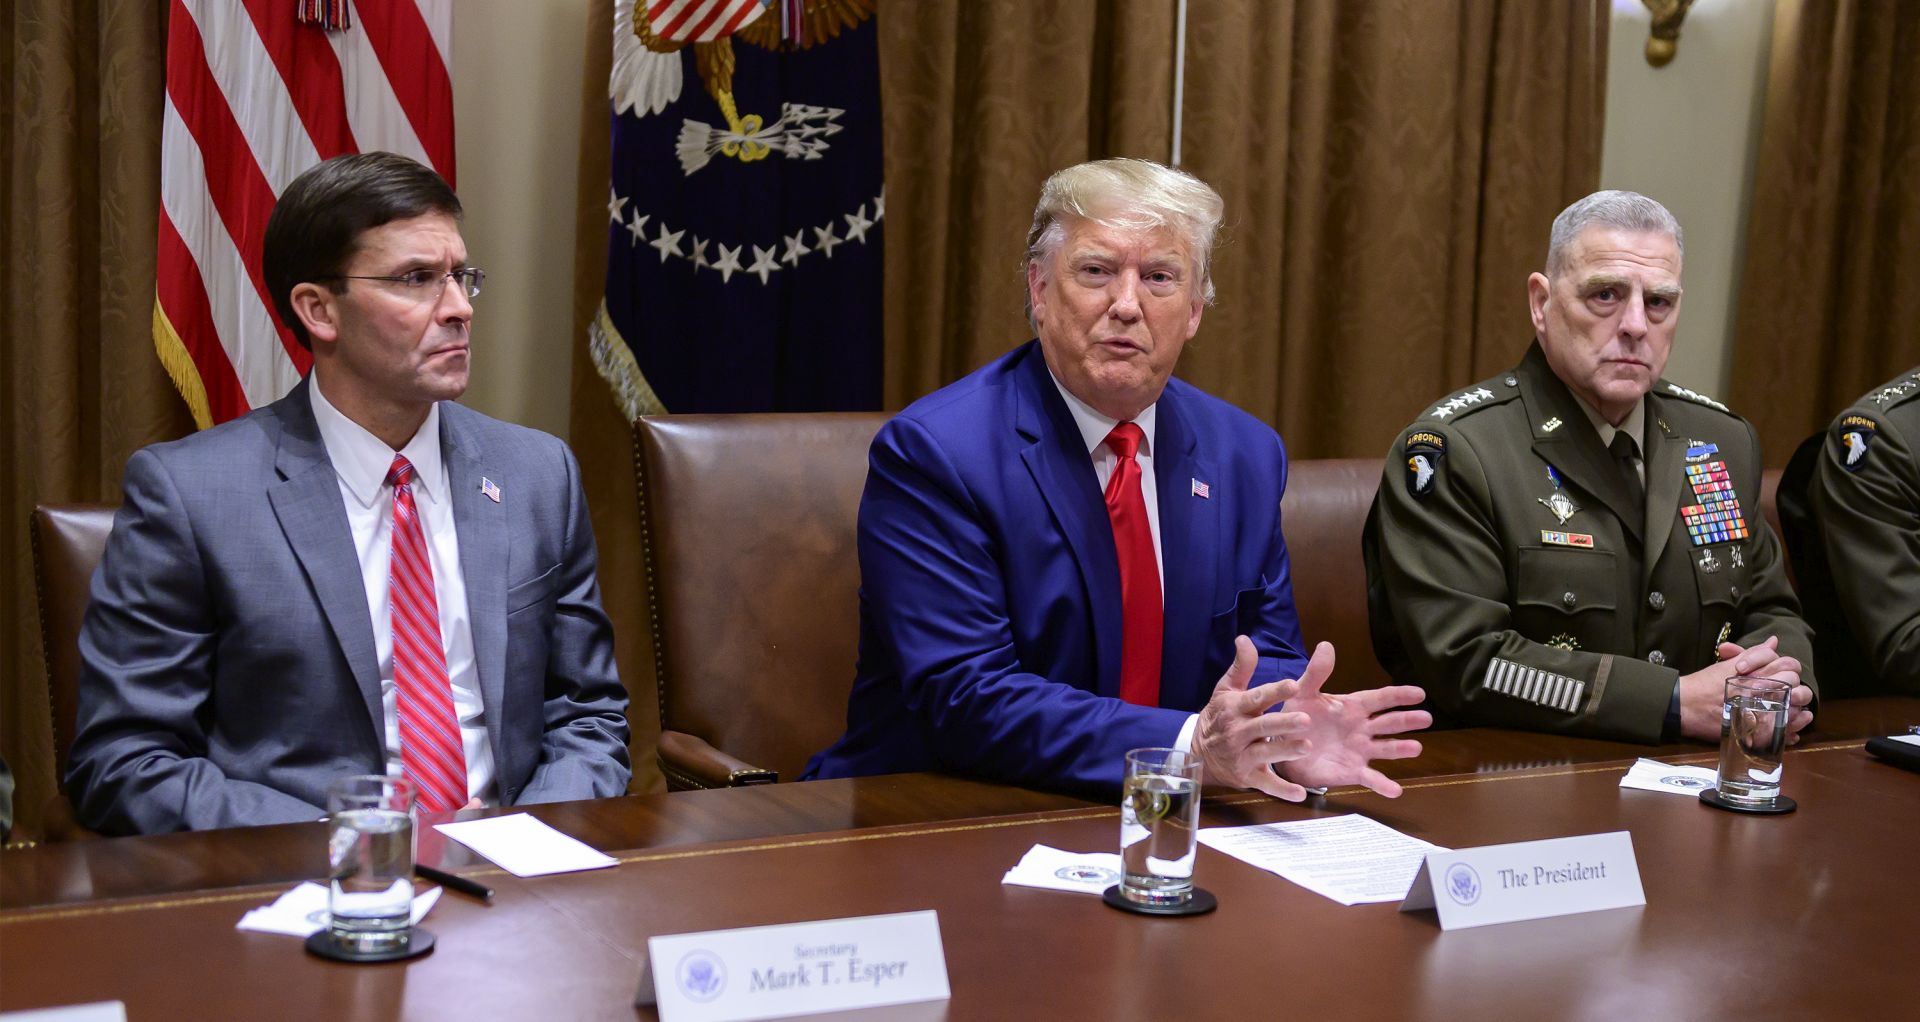 epa07904565 US President Donald J. Trump answers a reporter's question as he participates in a briefing with senior military leaders in the Cabinet Room of the White House in Washington, DC, USA, on 07 October 2019.  At left is United States Secretary of Defense Dr. Mark T. Esper, left, and at right is United States Army General Mark A. Milley, Chairman of the Joint Chiefs of Staff.  EPA/Ron Sachs / POOL